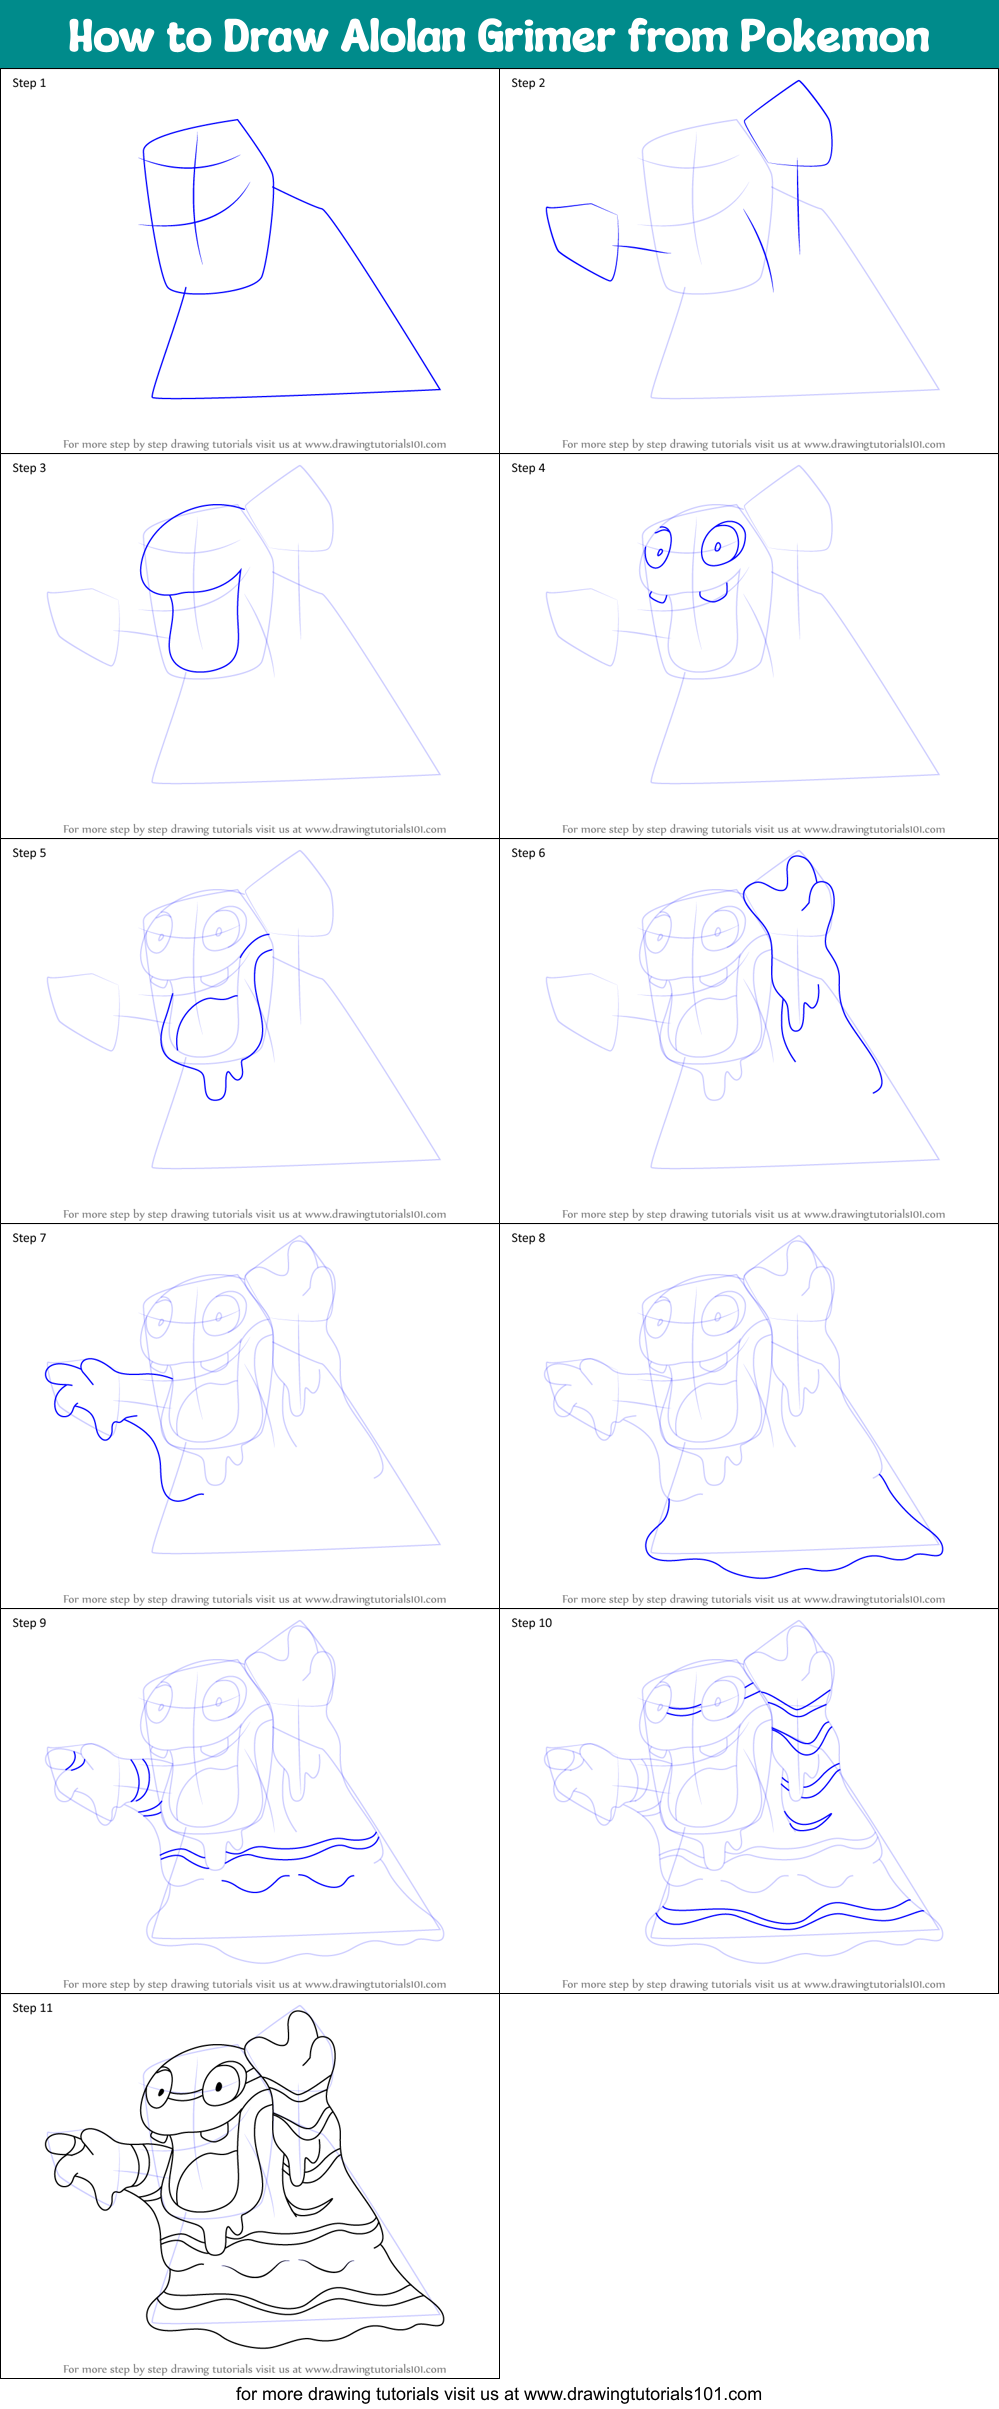 How to Draw Alolan Grimer from Pokemon (Pokemon) Step by Step ...